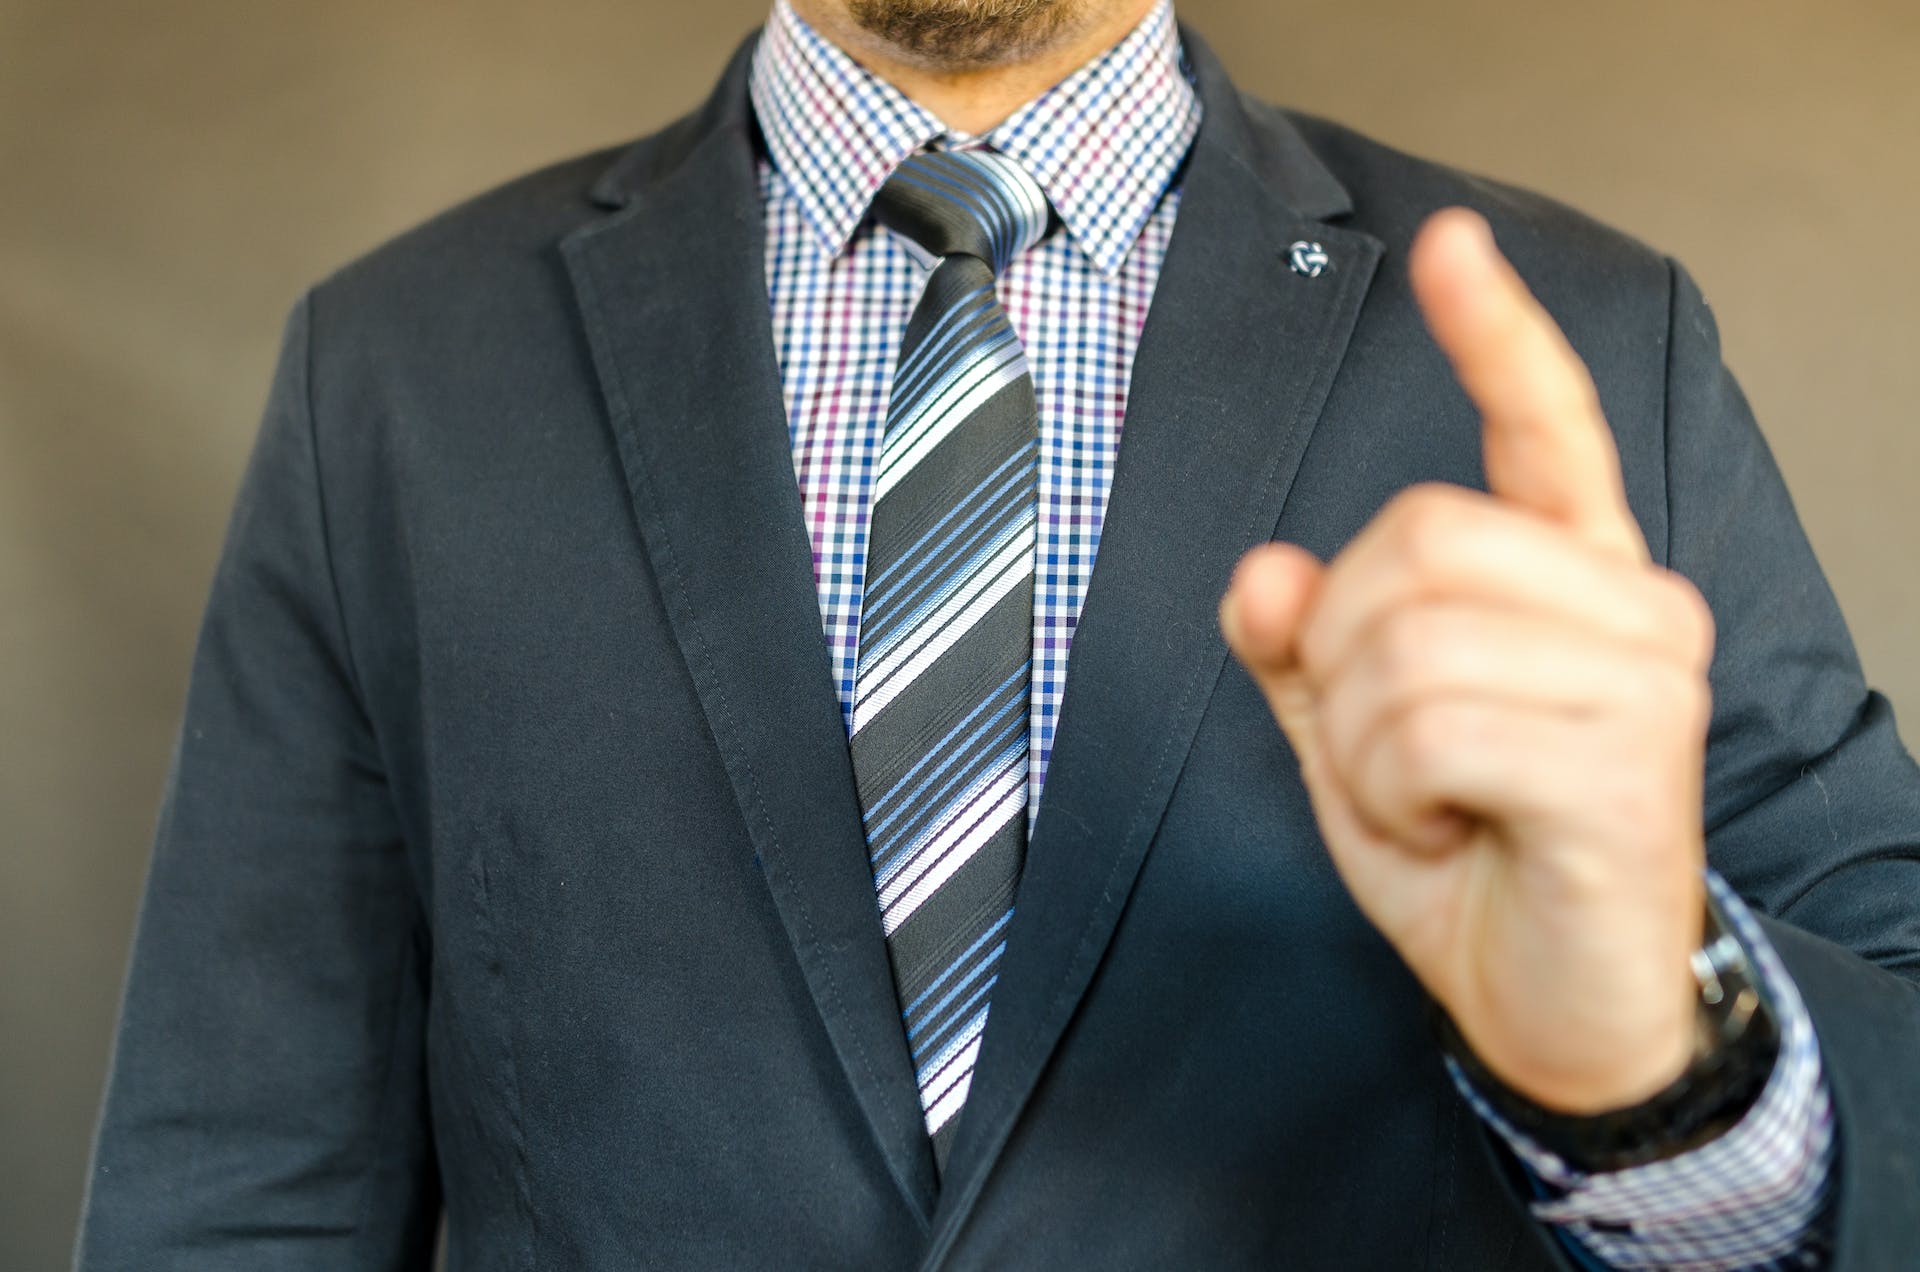 Man in suit pointing a finger | Source: Pexels